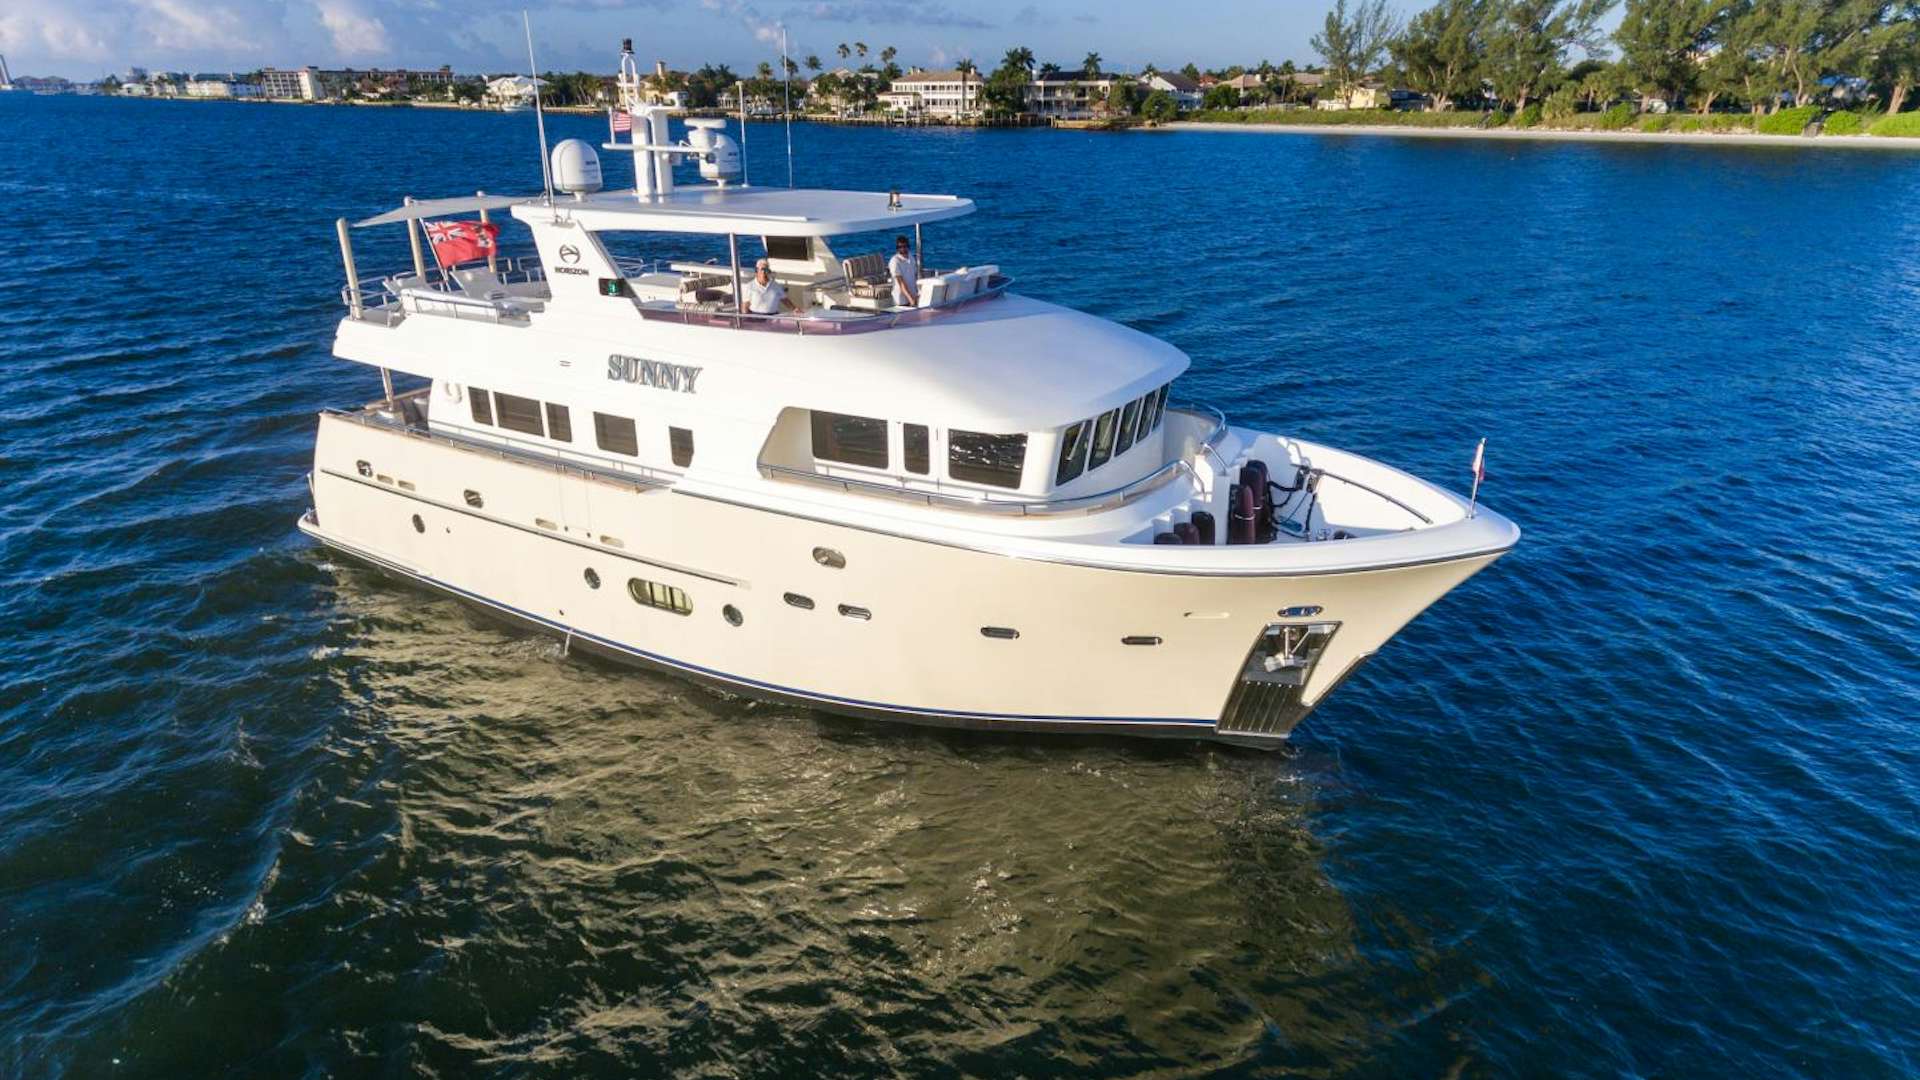 Watch Video for SUNNY Yacht for Sale